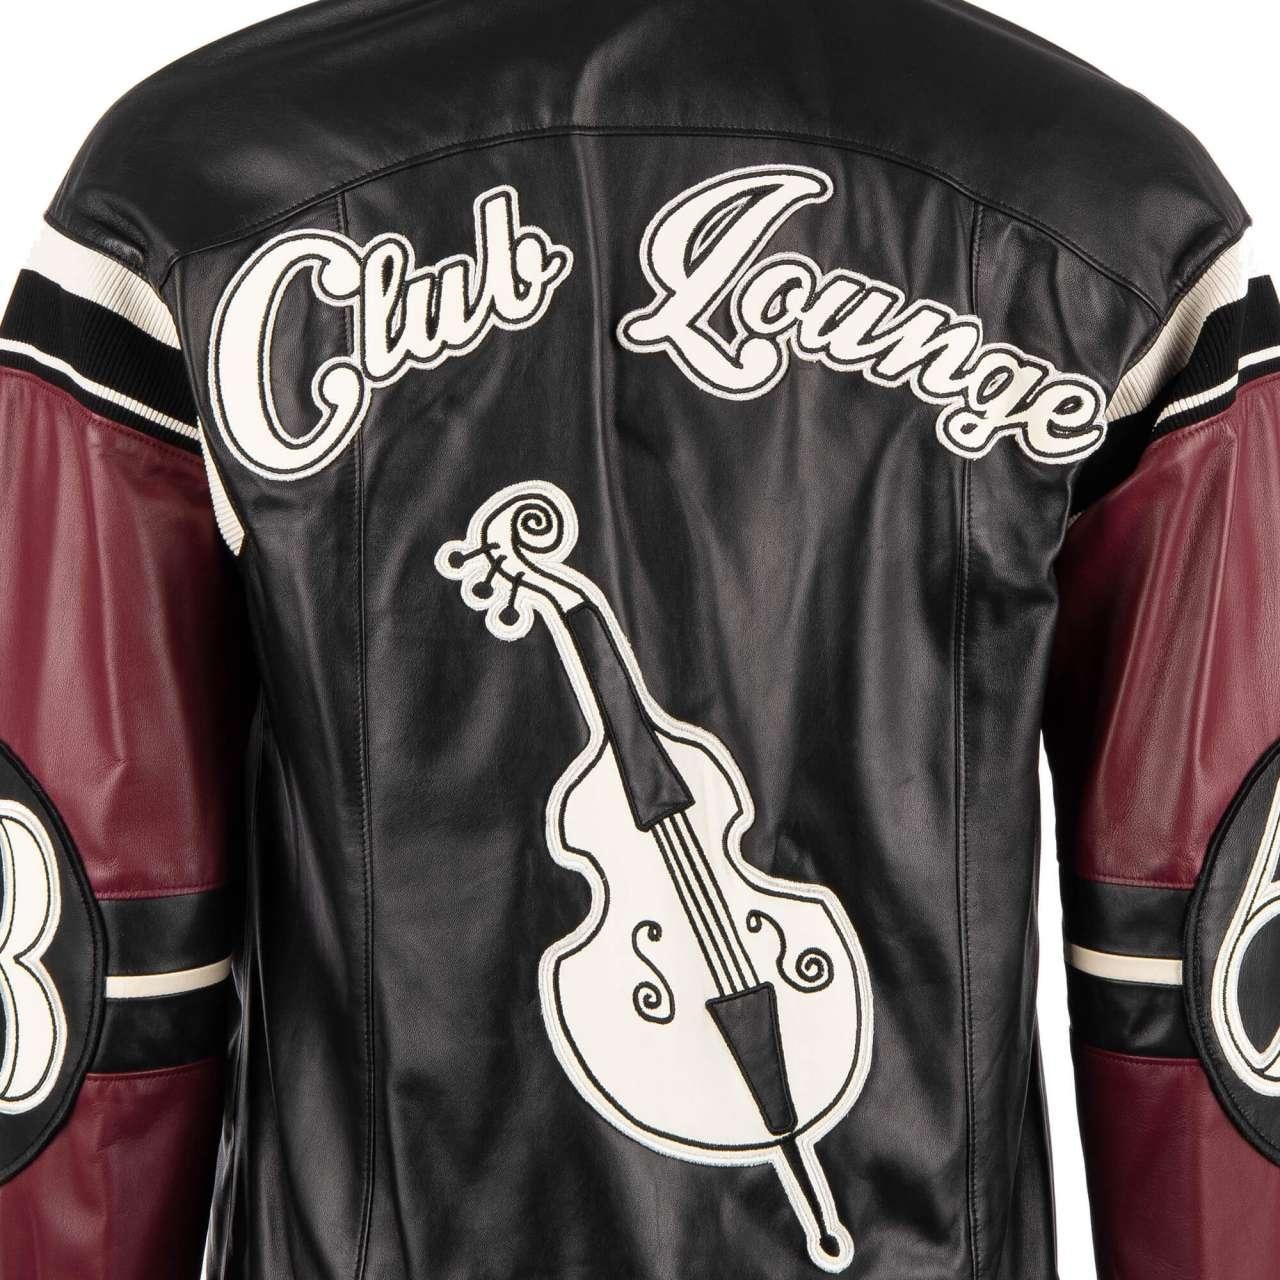 D&G Club Lounge Cello Embroidered Bomber Leather Jacket Black Bordeaux 44 For Sale 3